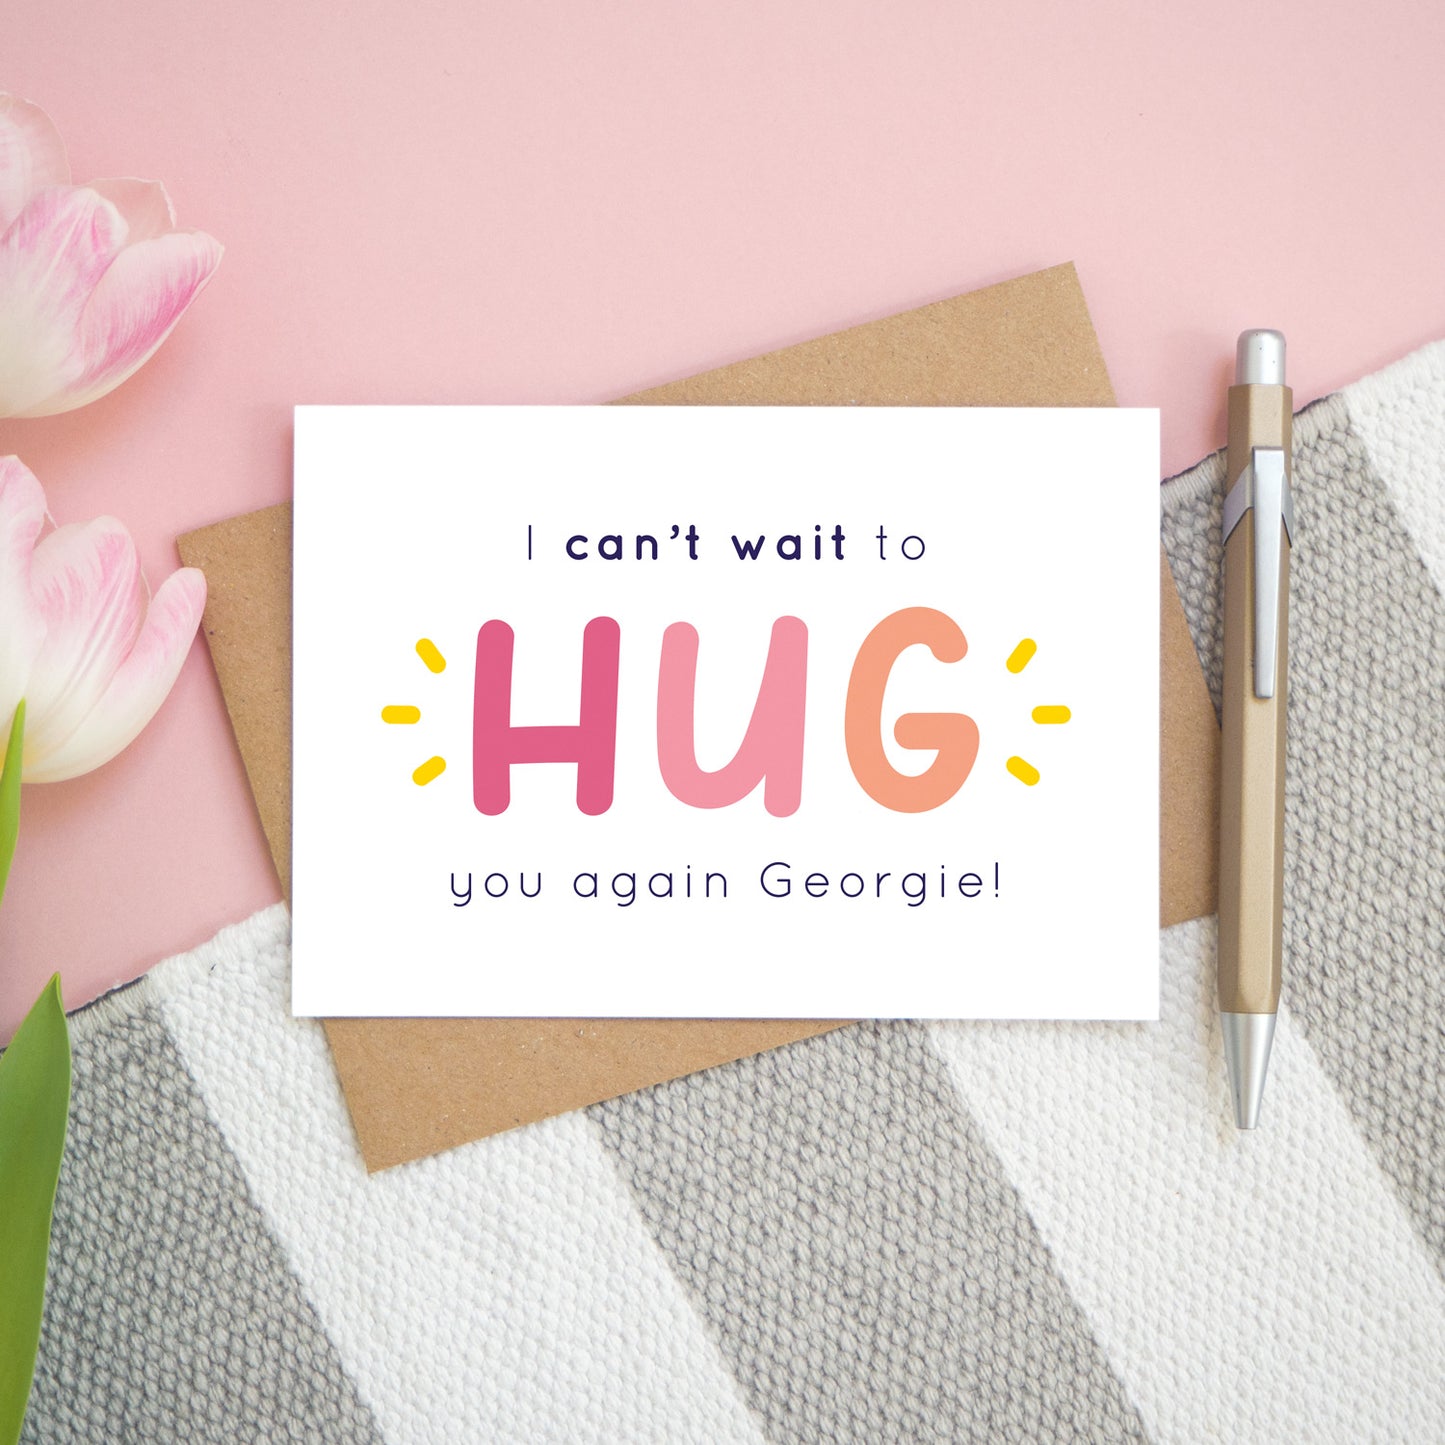 This is the personalised option of the 'I can't wait to hug you again' card with the sample name of 'Georgie'. There is a pen to the right for scale and has been photographed on a pink, and grey & white striped background.